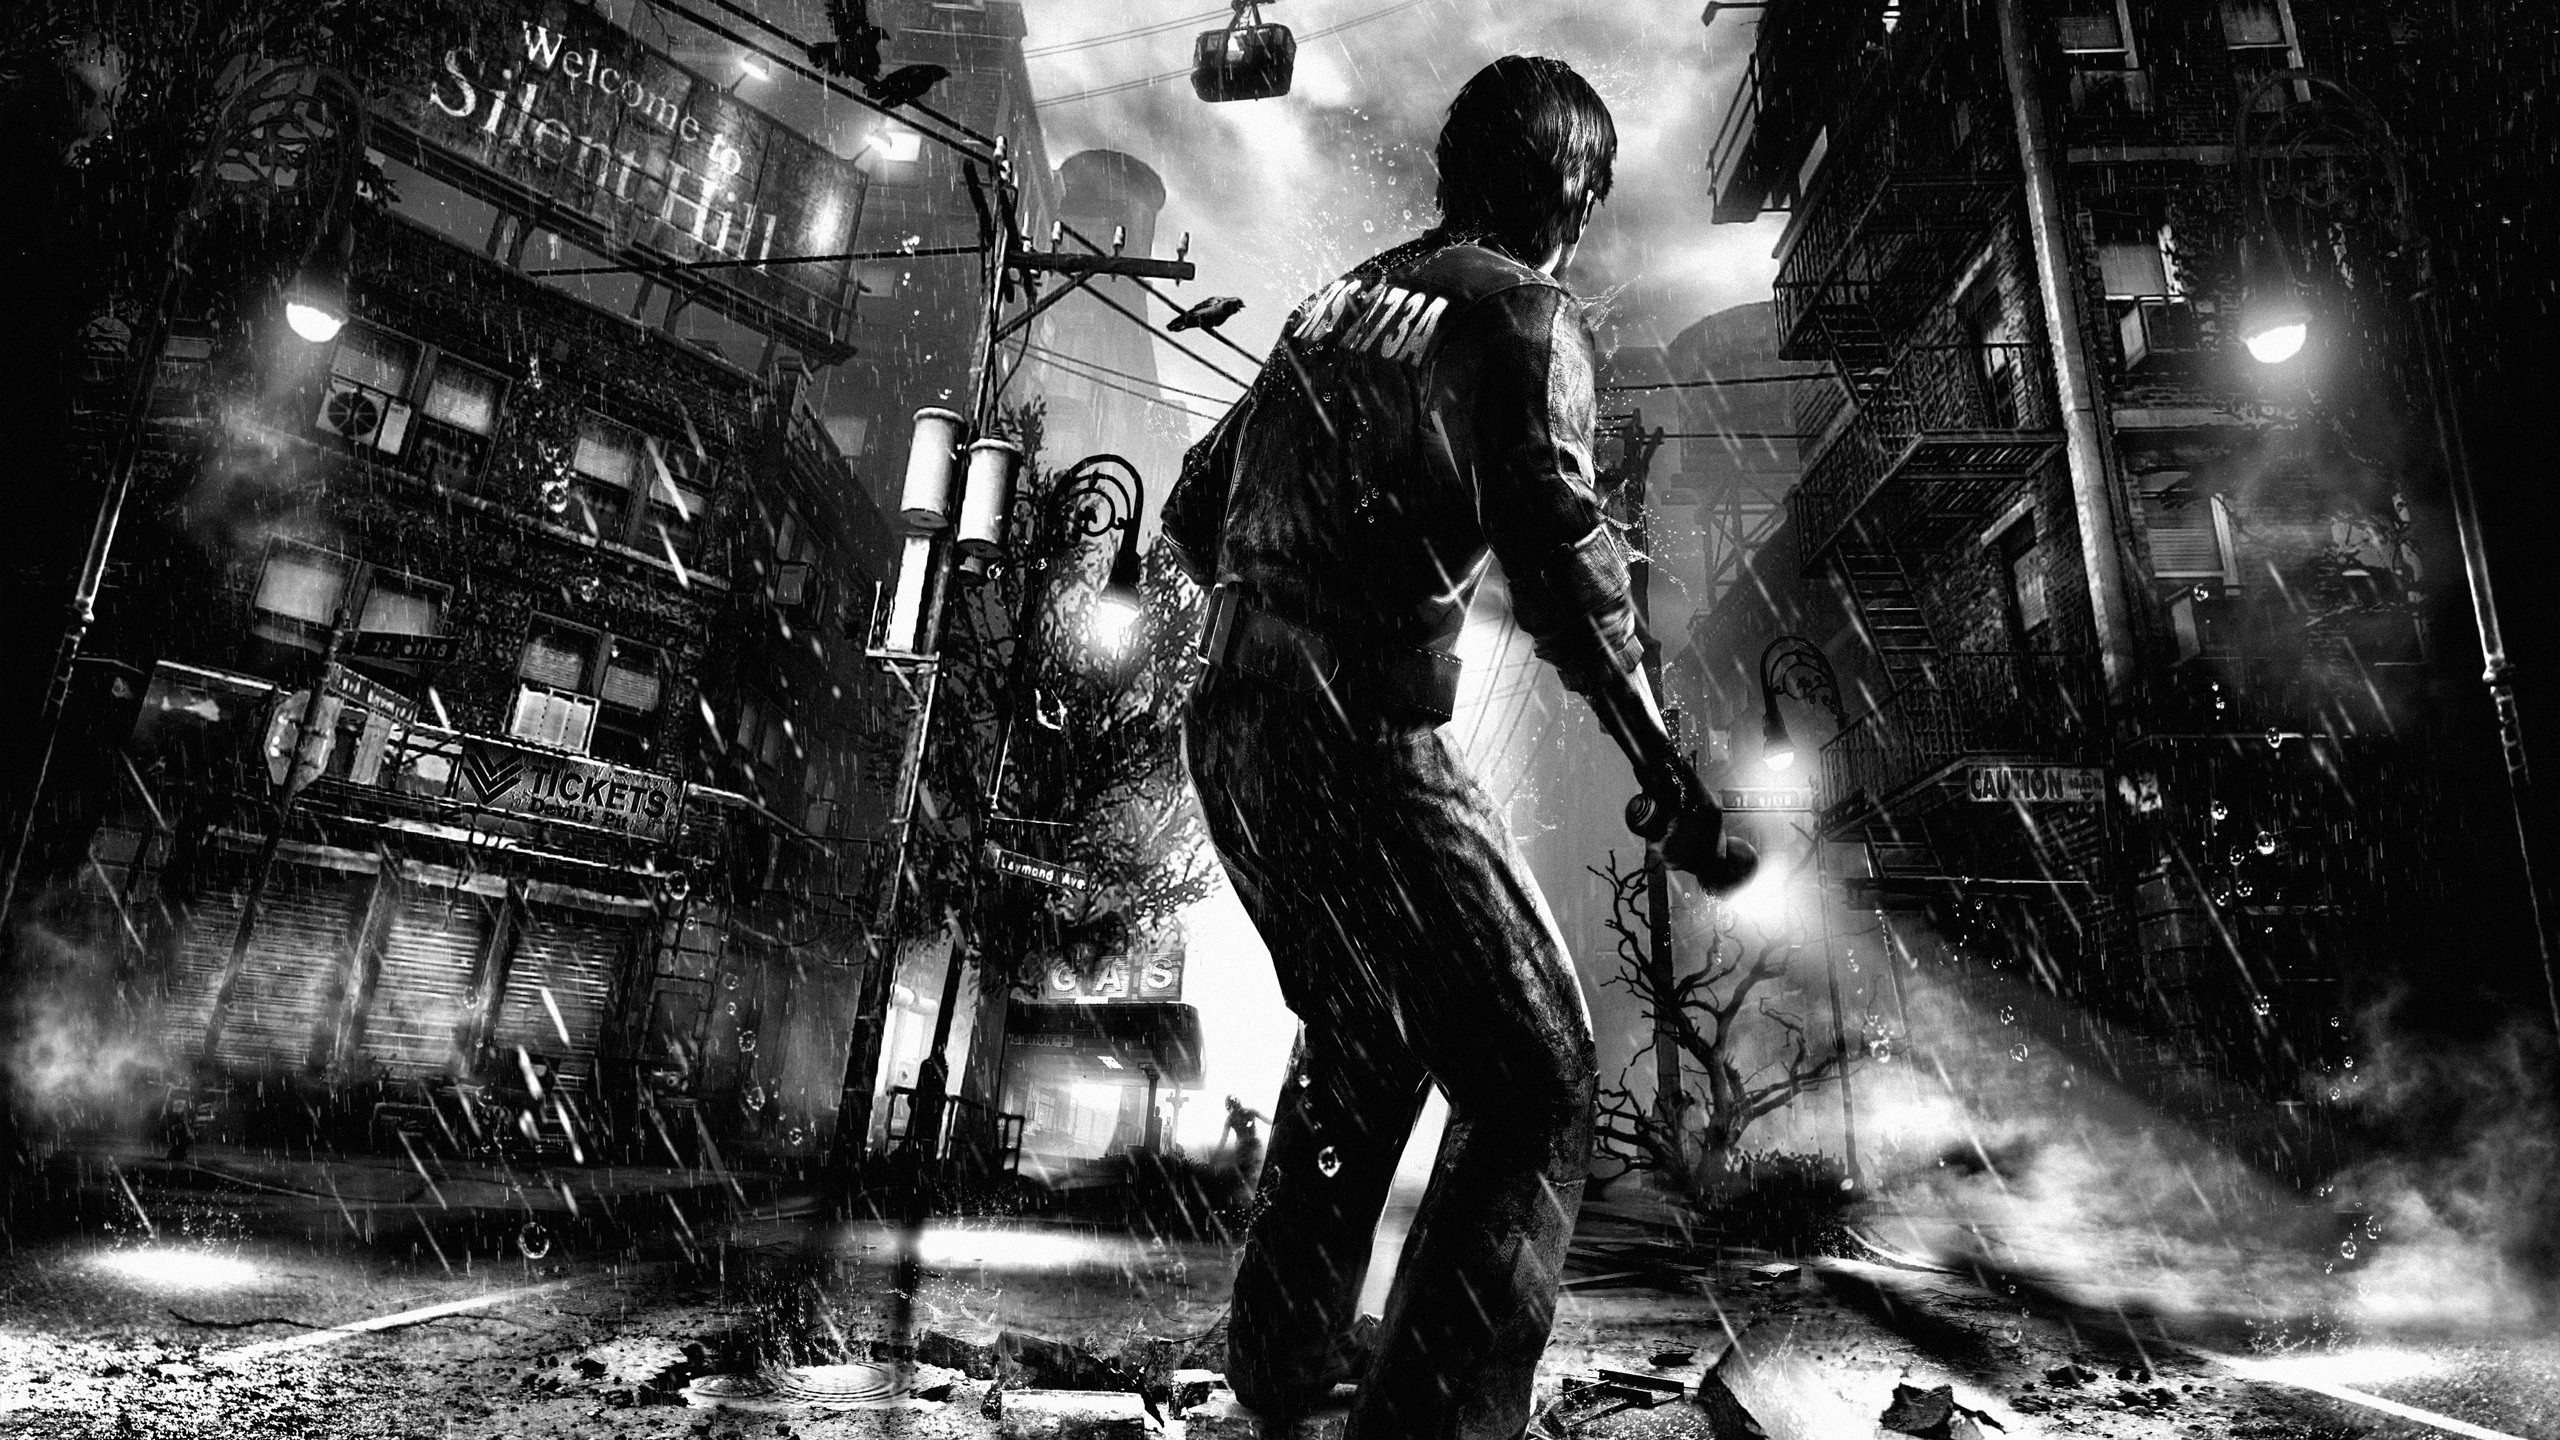 Silent Hill Downpour for 2560x1440 HDTV resolution